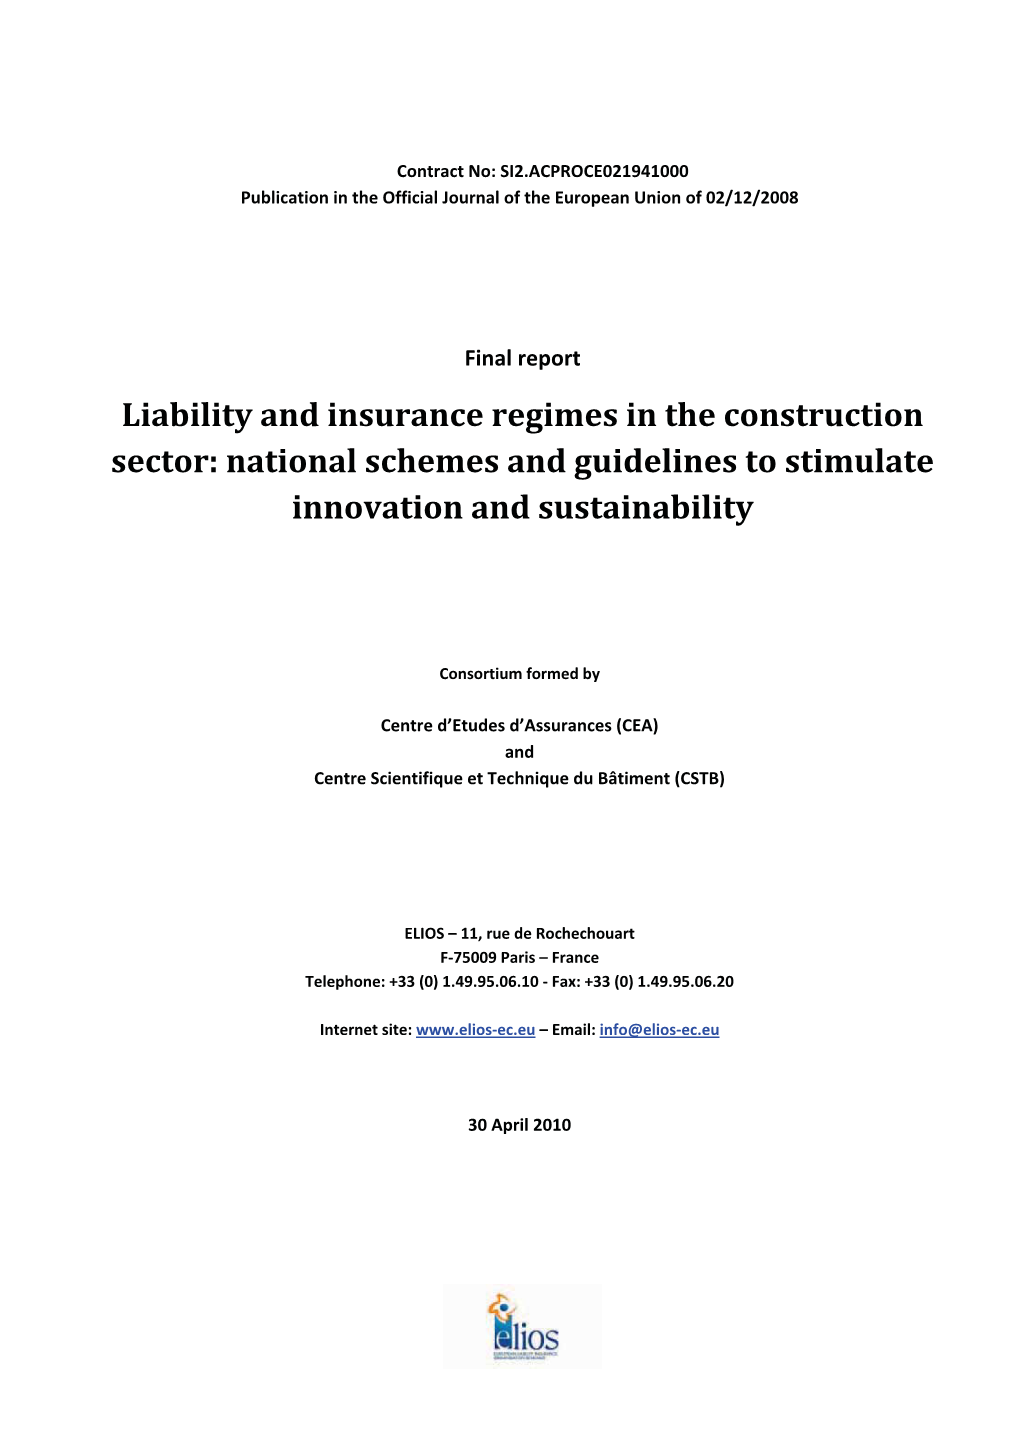 Liability and Insurance Regimes in the Construction Sector: National Schemes and Guidelines to Stimulate Innovation and Sustainability